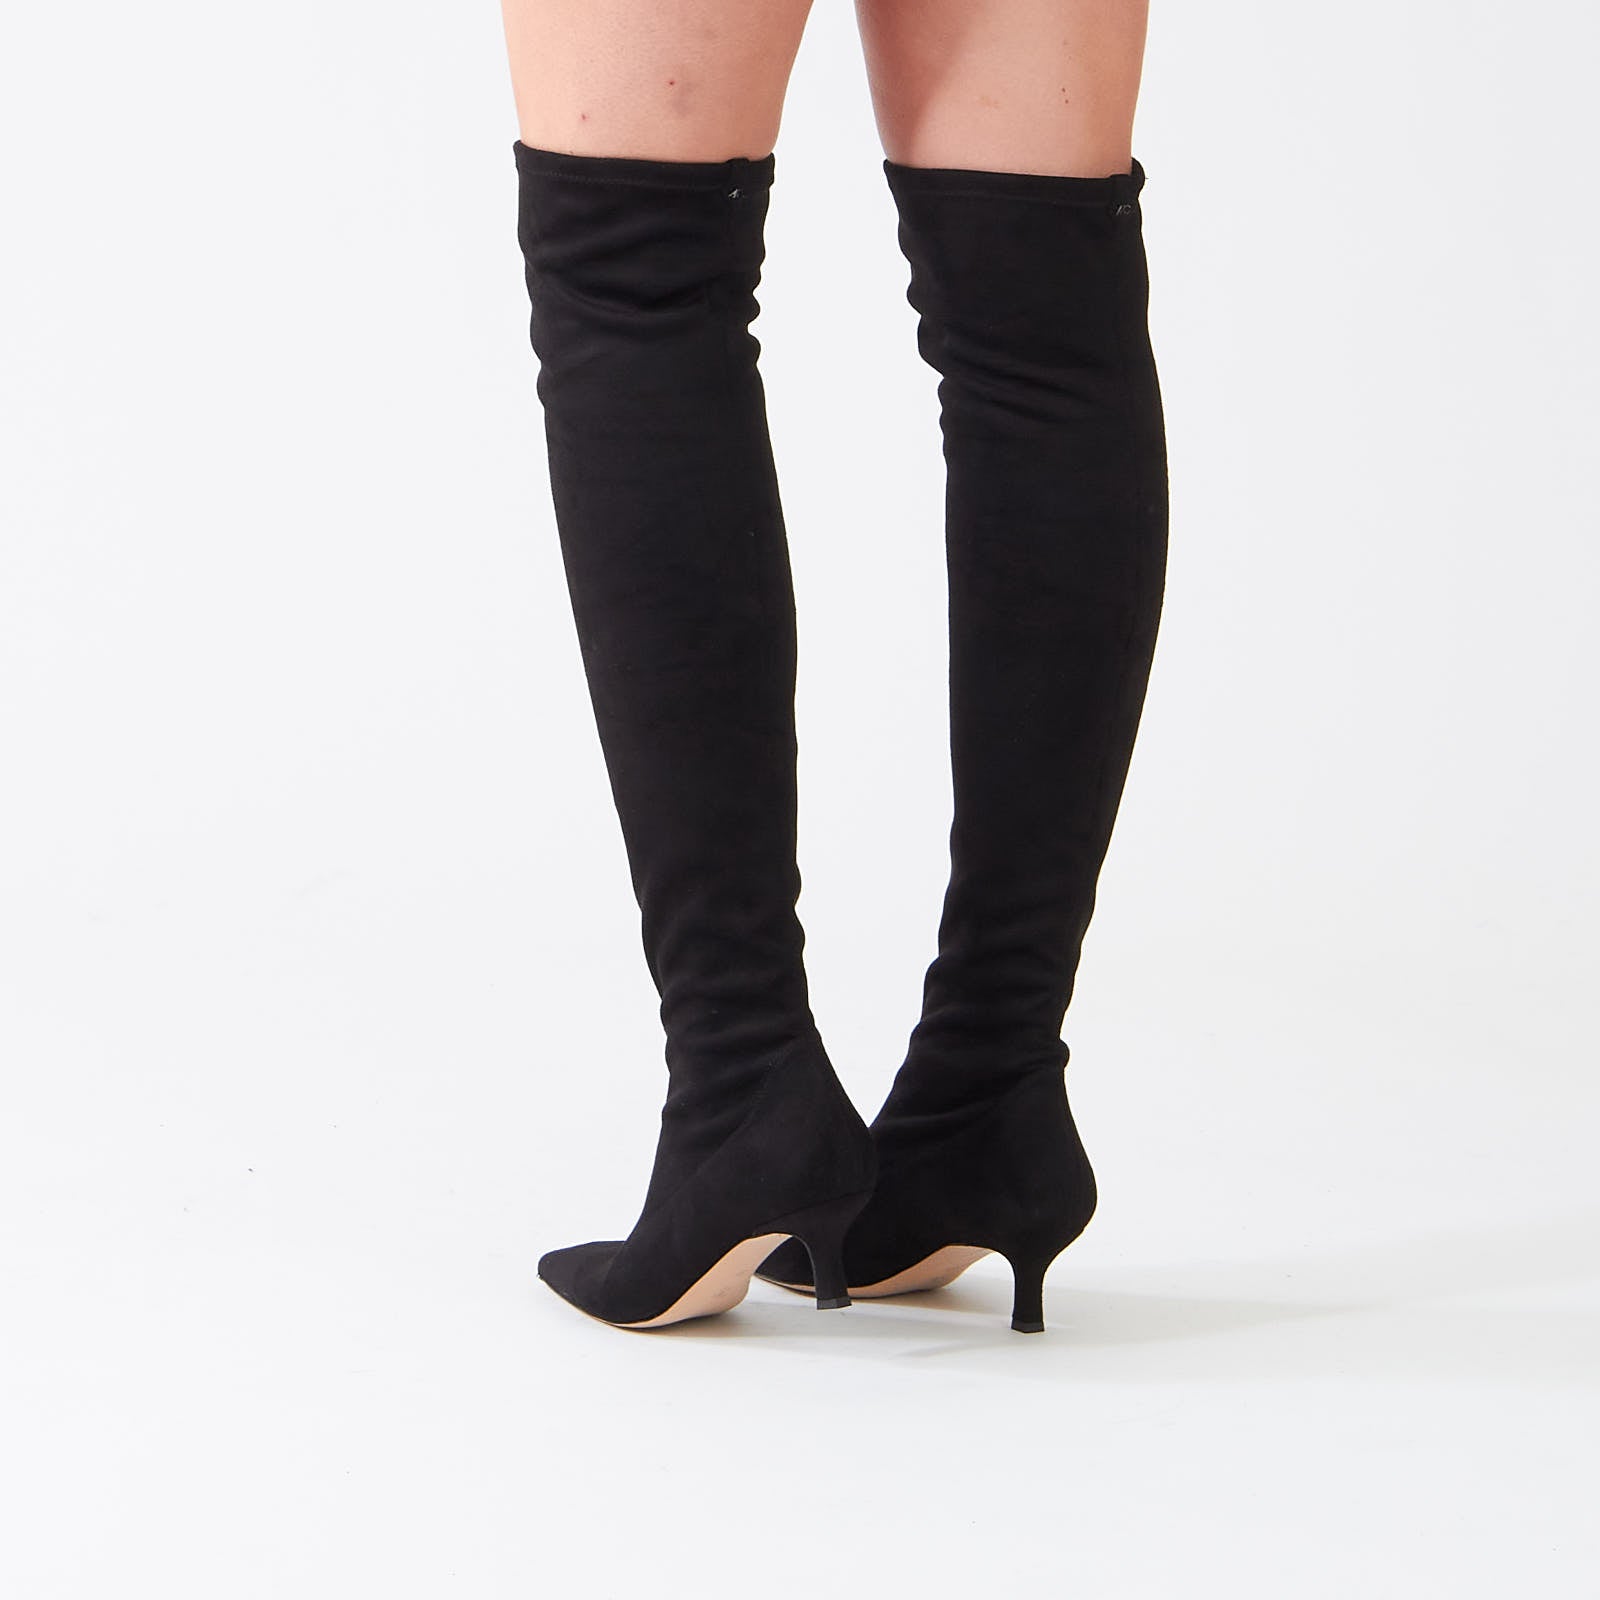 Black Over The Knee Boots